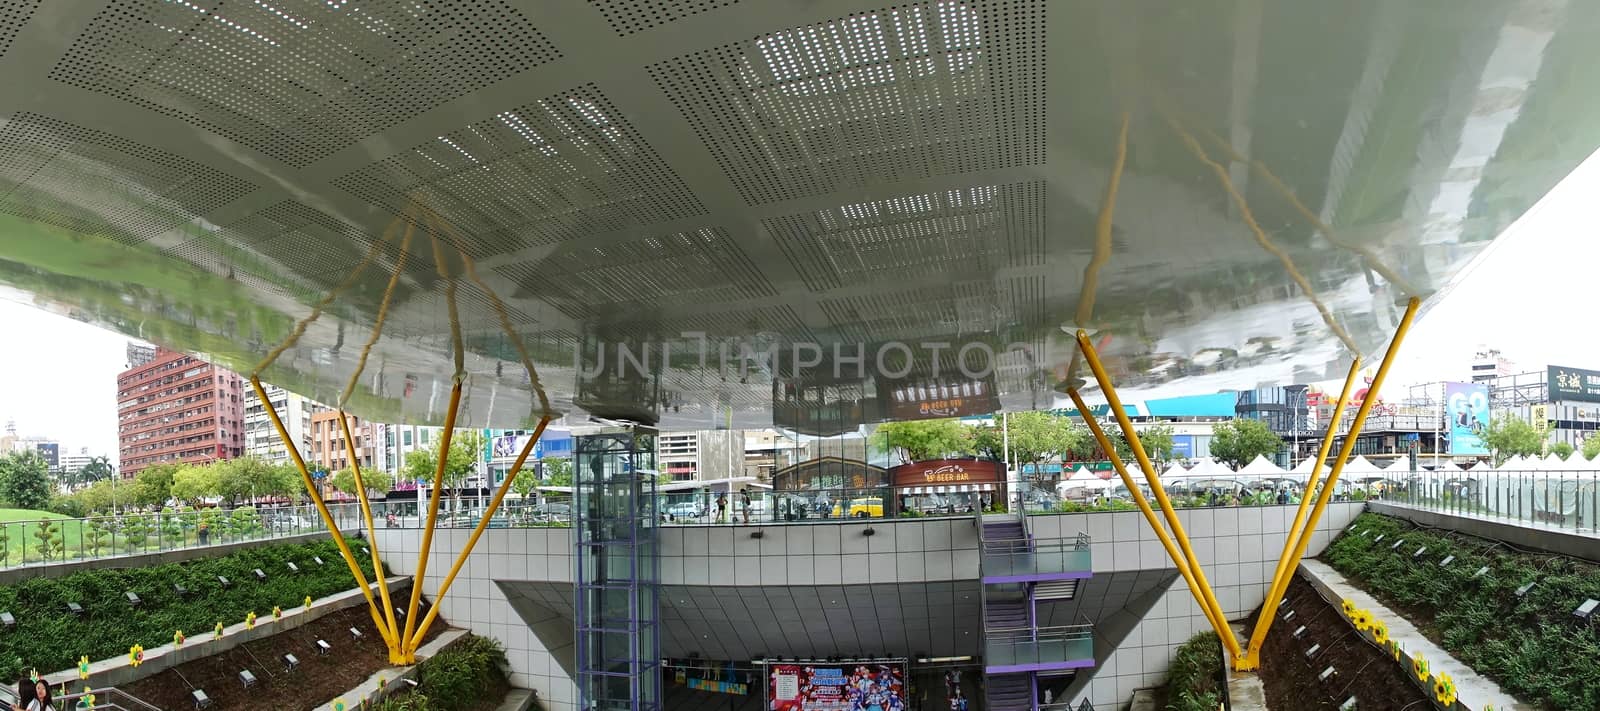 KAOHSIUNG, TAIWAN -- AUGUST 18, 2018: The modern design of the Central Park Station exit of the Kaohsiung subway system.
